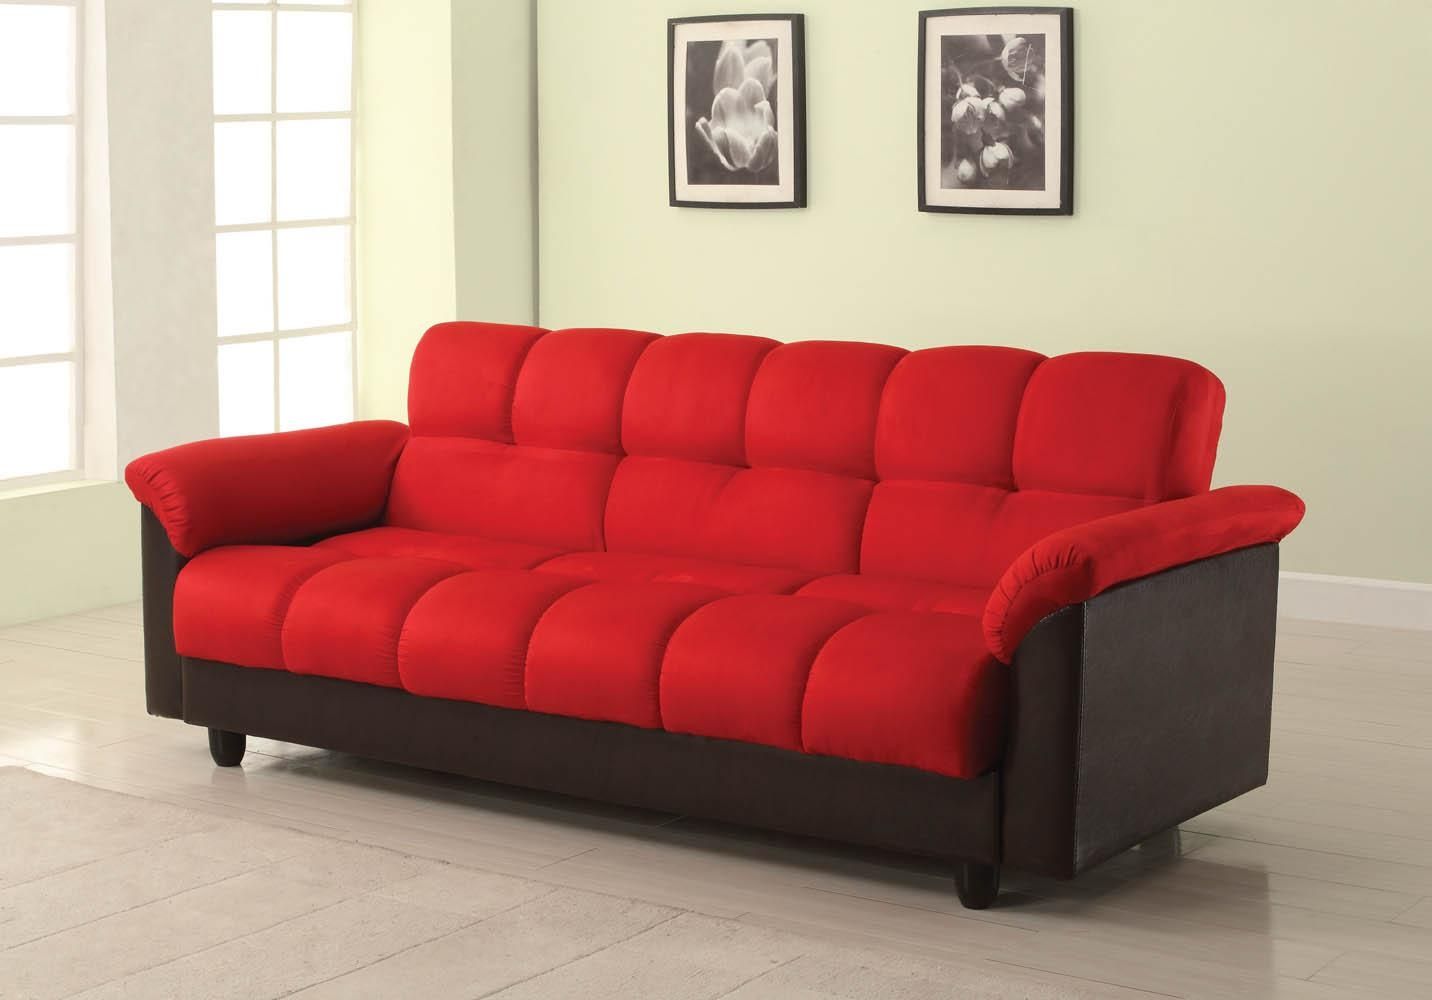 Black And Red Sofa With Design Ideas 25572 | Kengire Within Sofa Red And Black (View 13 of 20)